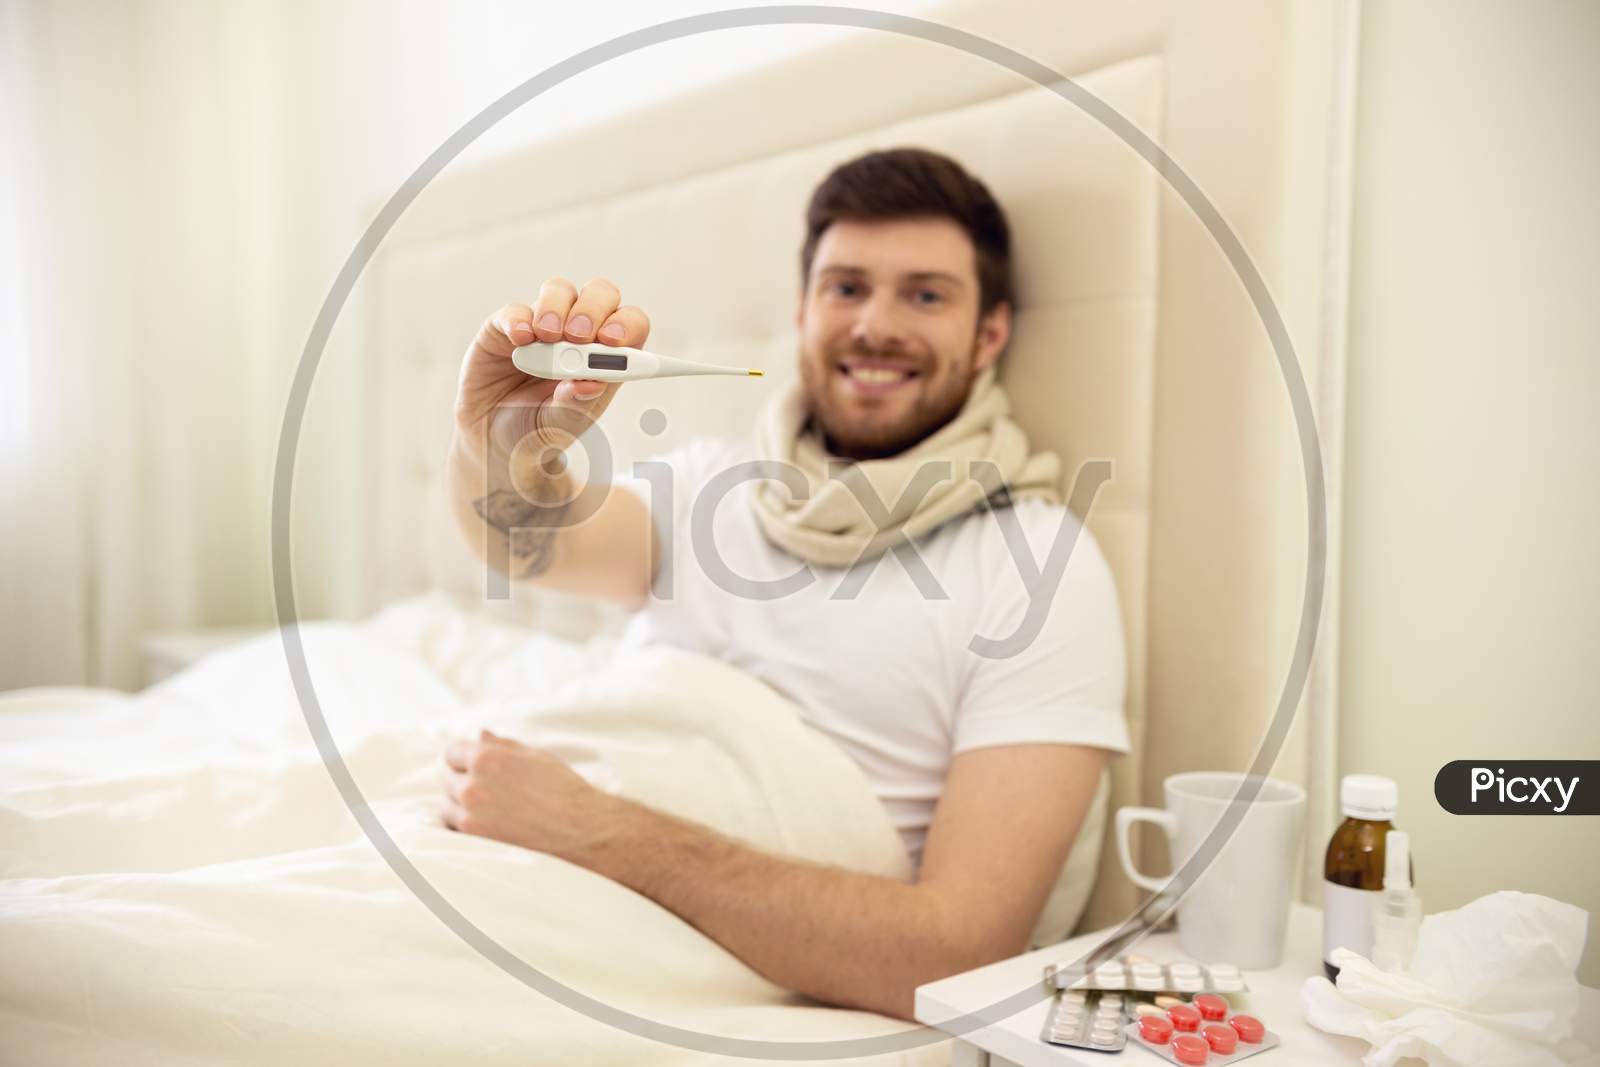 Man Sick In Bed Showing Thermometer, Smiling. Man Having Good Temperature. Man Ill At Home.